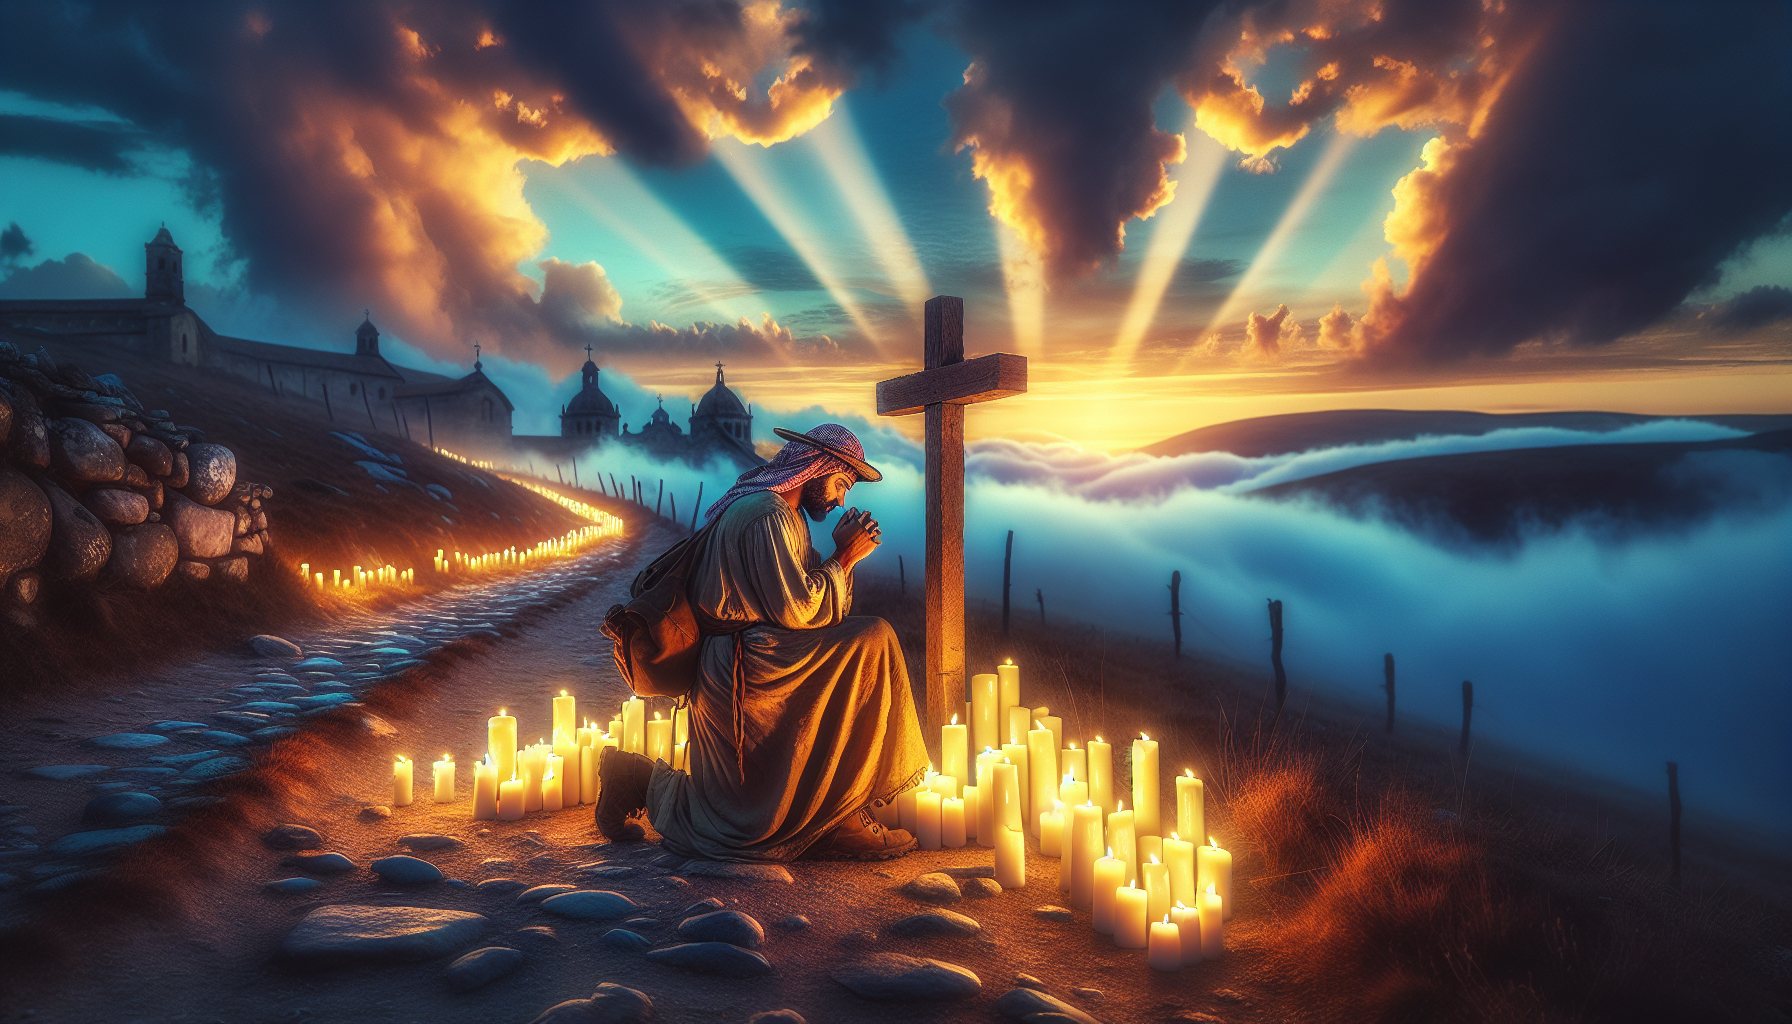 A serene, twilight scene on the ancient paths of Camino de Santiago with a solitary pilgrim kneeling by a rustic wooden cross, surrounded by glowing candles. The pilgrim, clad in modest attire, holds